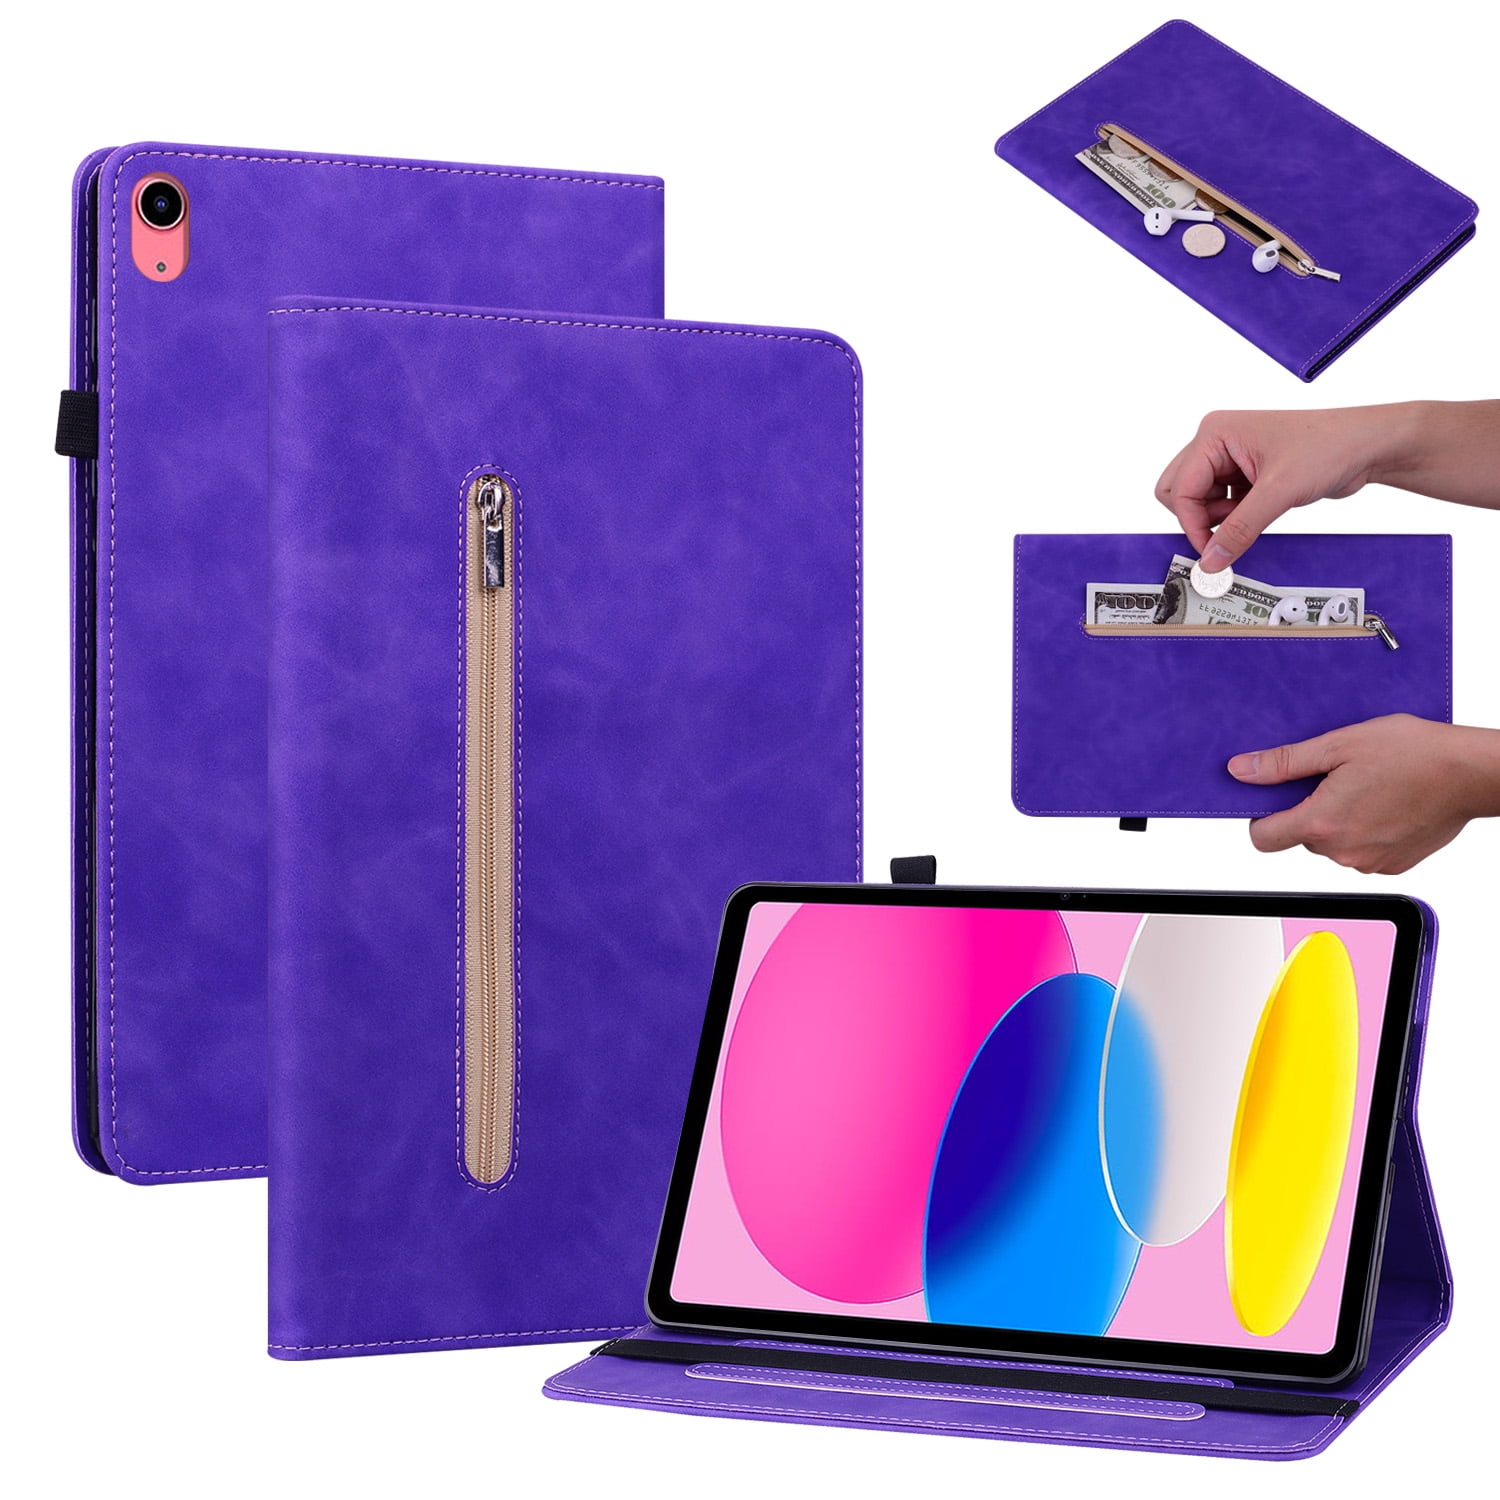  Supveco Case for iPad 10th Generation (10.9'', 2022 Released),  Dual Layer Full Body Protection Cases with Built-in Screen Protector  Drop-Proof Cover for iPad 10.9 Inch - Purple : Electronics